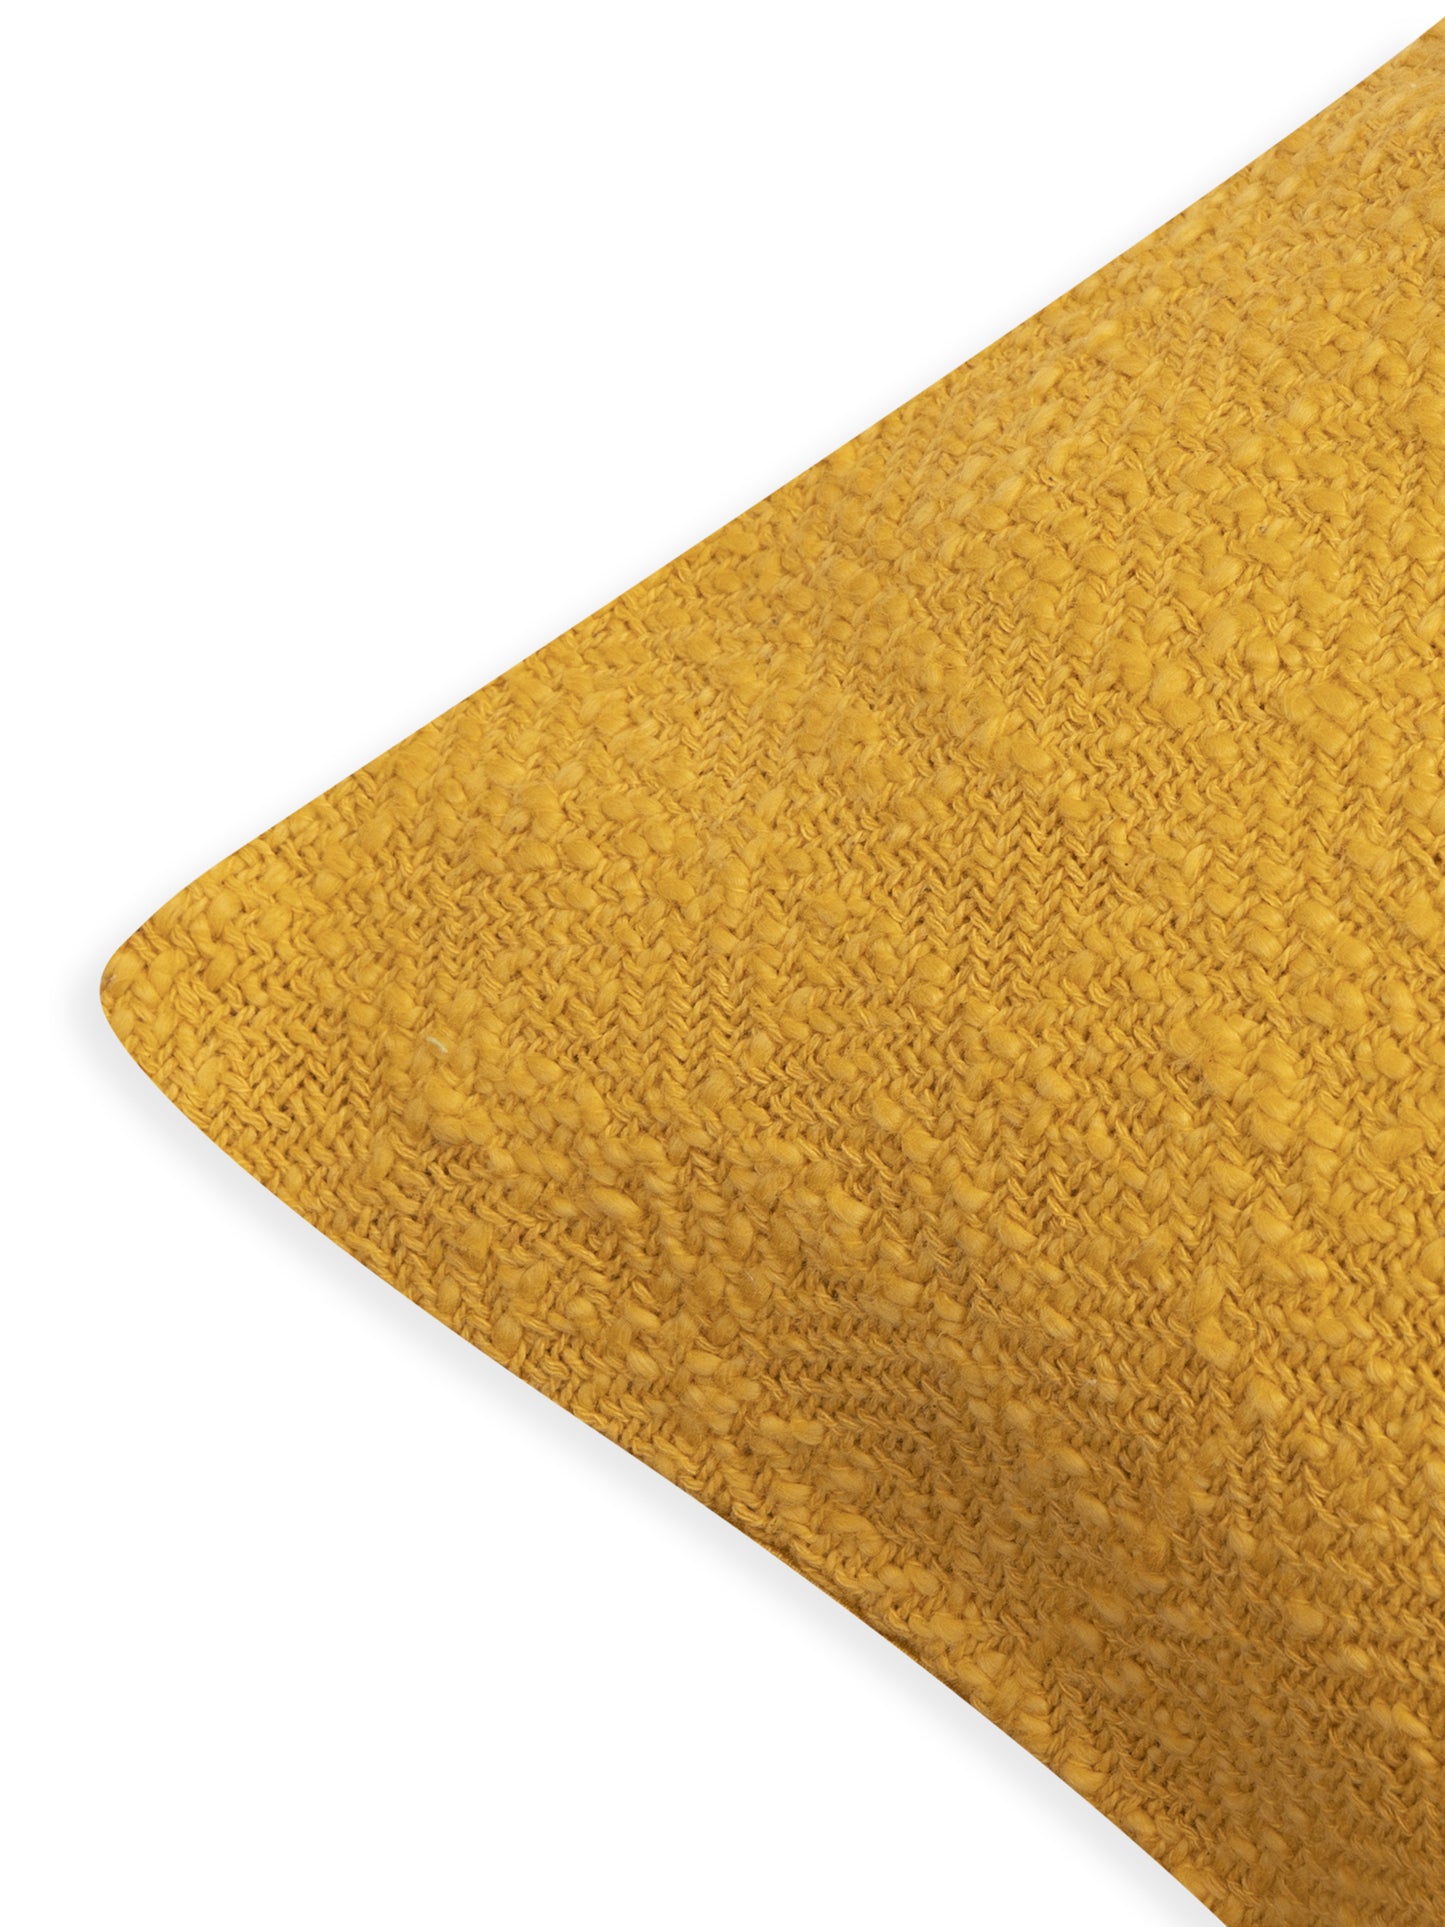 Mustard cotton tweed weave cushion cover